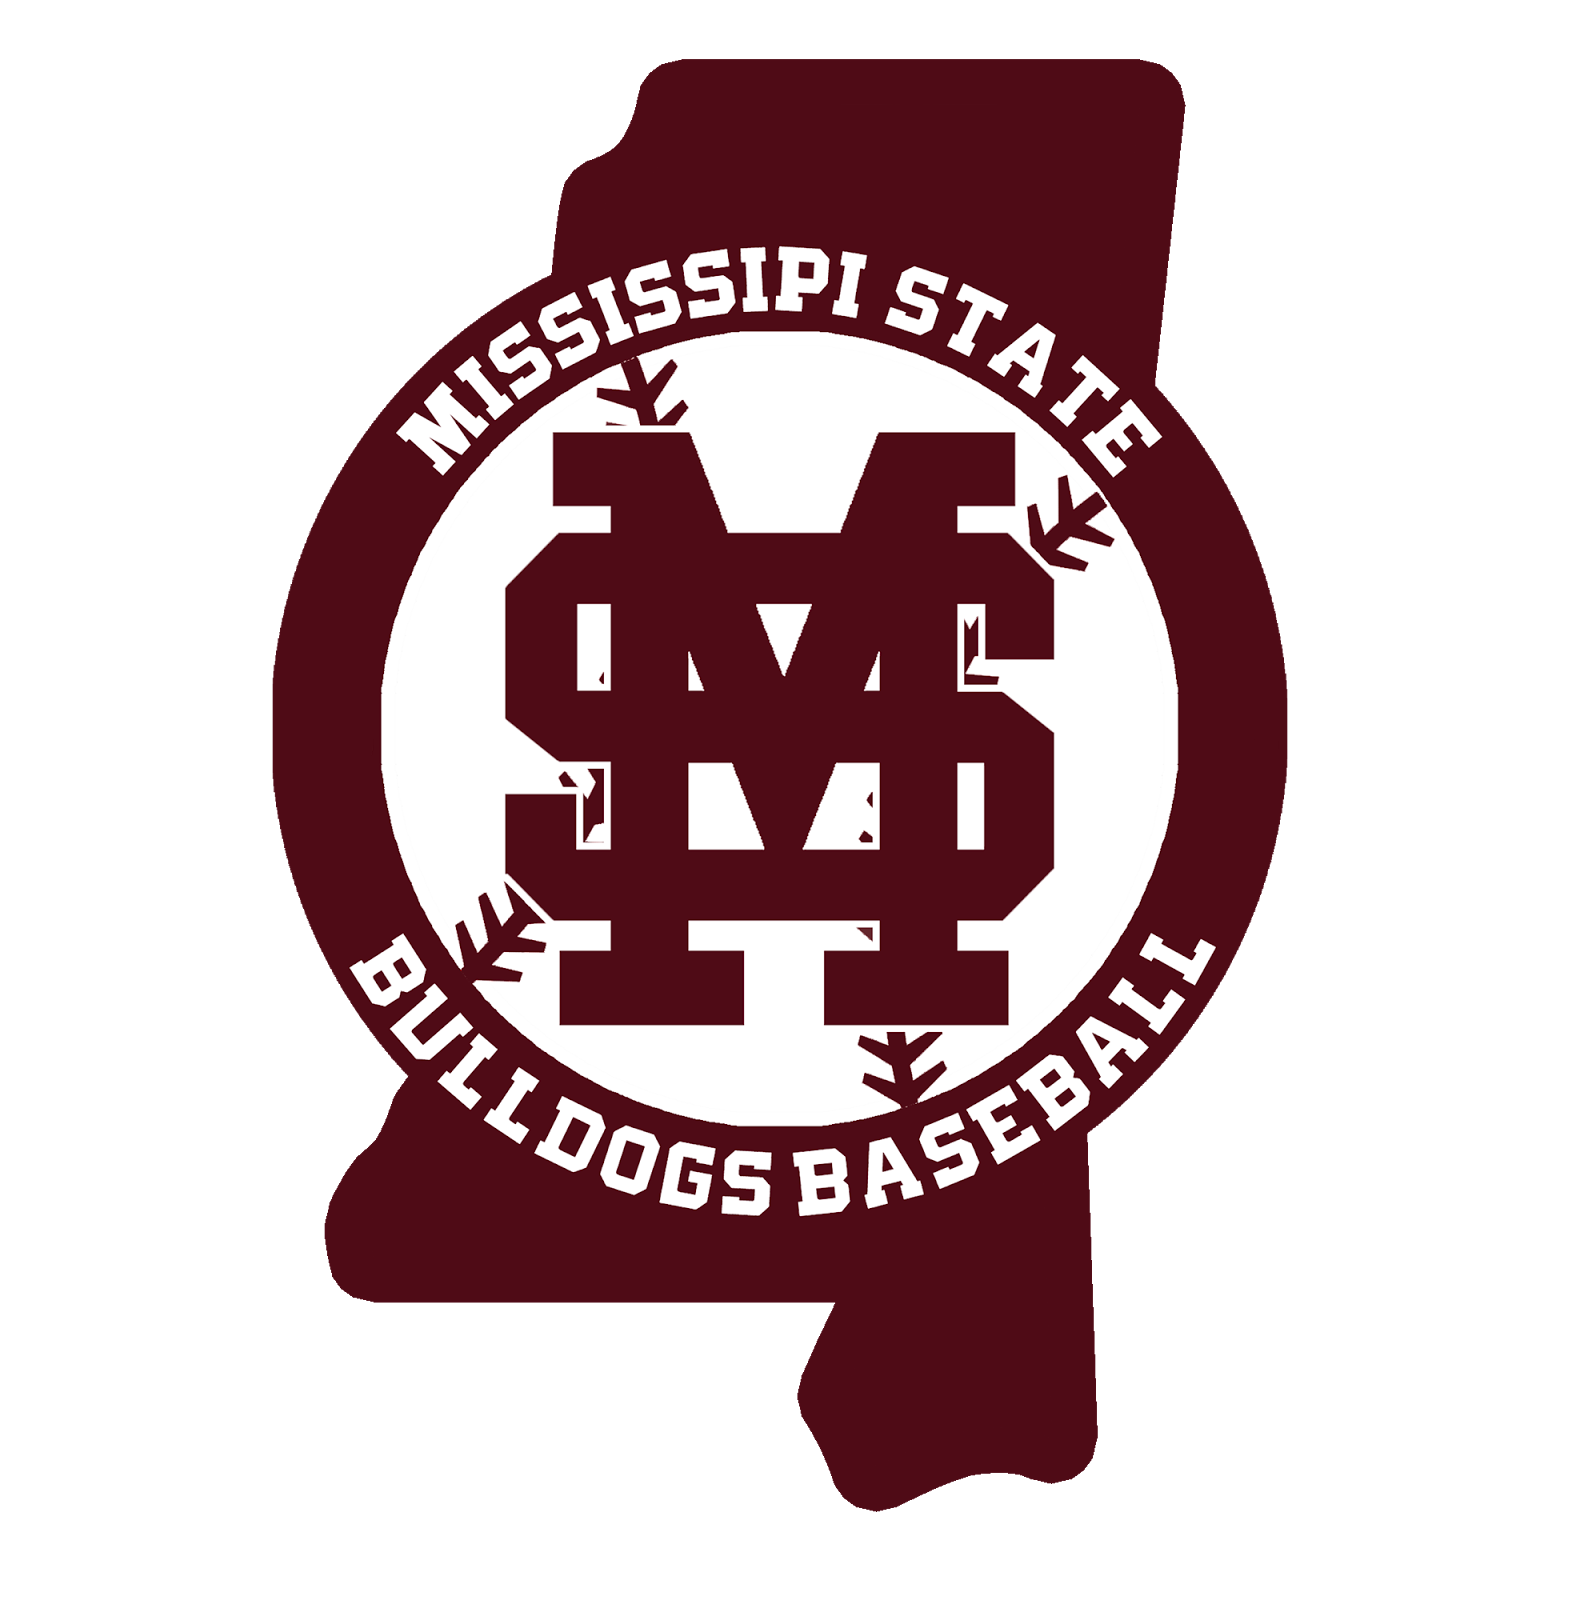 Mississippi State Wallpaper iPhone